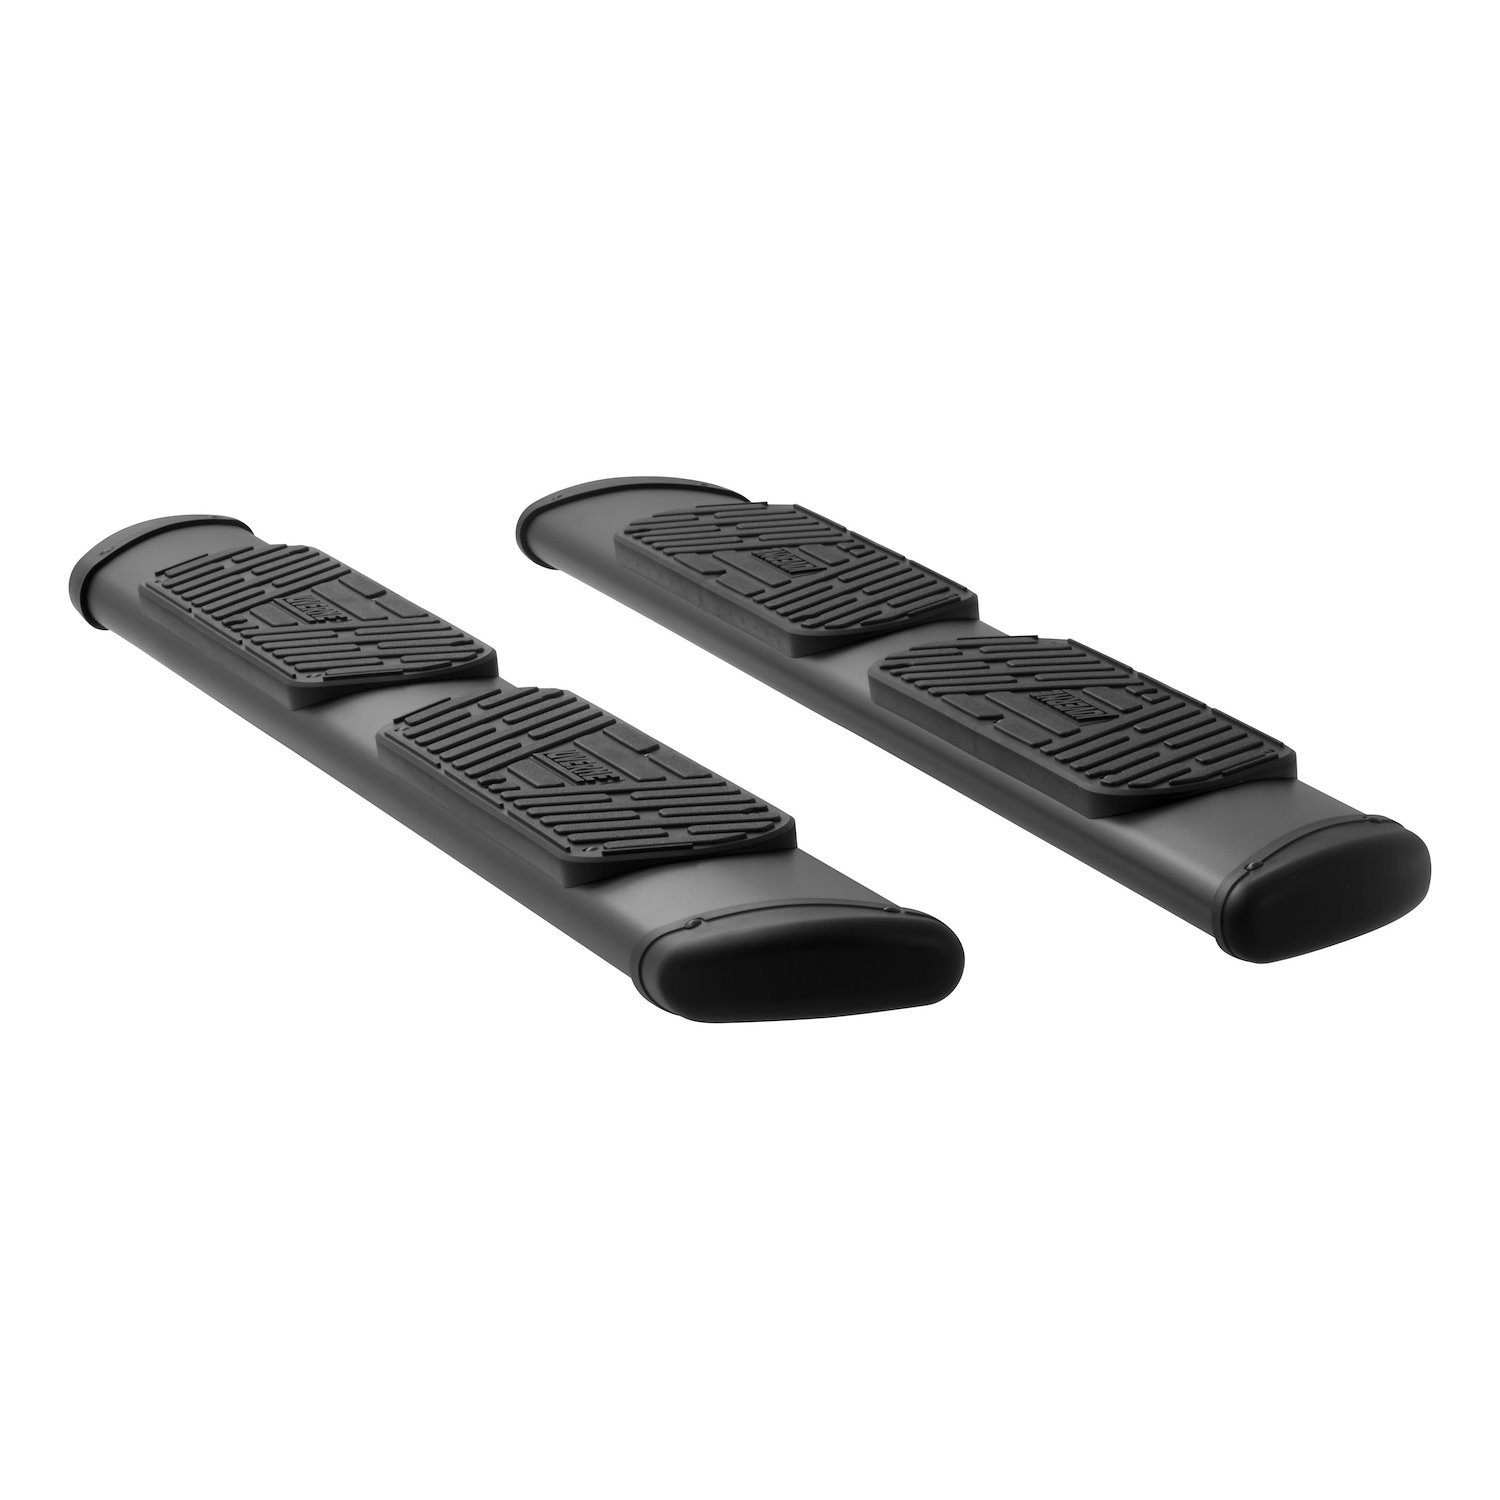 277078-401445 Regal 7 Black Stainless 78 in. Oval Side Steps Fits Select Chevy Silverado, GMC Sierra Ext. Cab